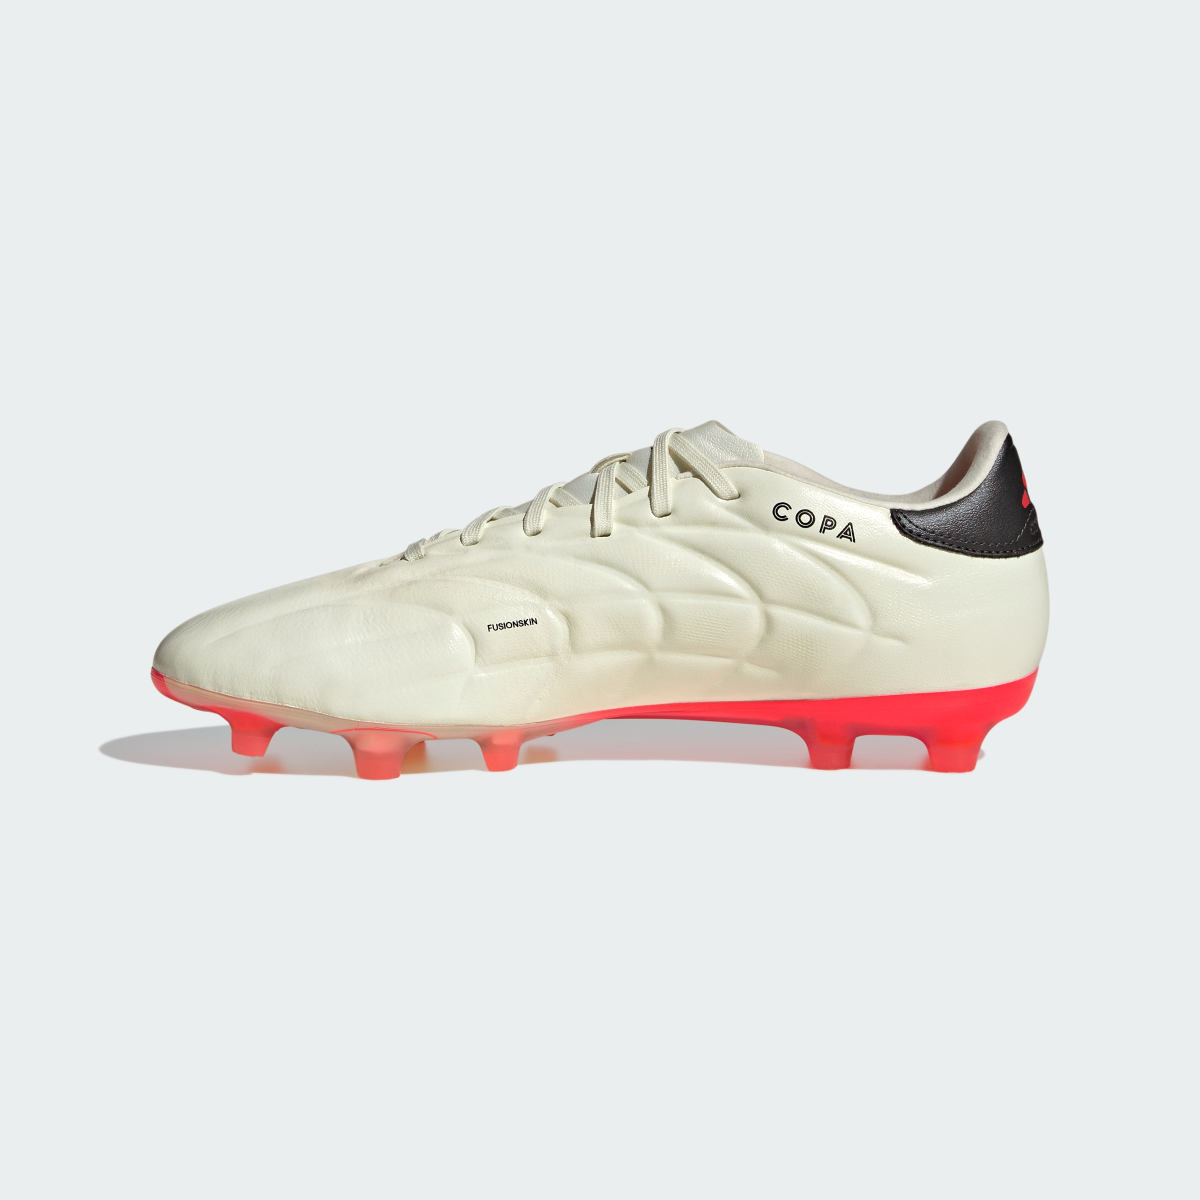 Adidas Copa Pure II Pro Firm Ground Boots. 7